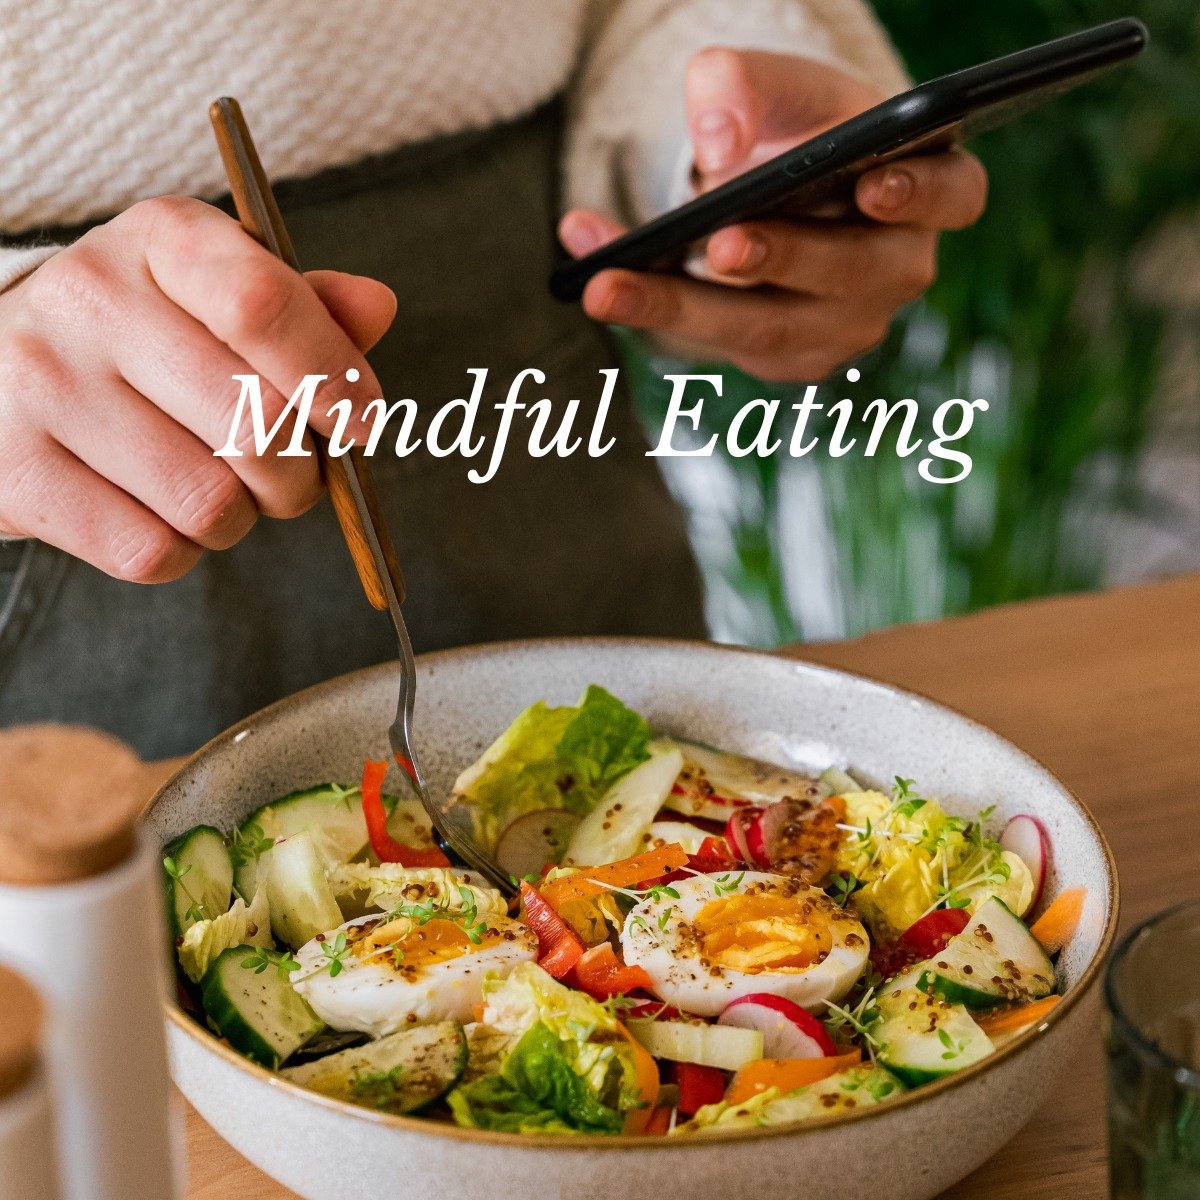 Mindful Eating Tips

Do you often find yourself eating on the go or in front of screens? I know its so easy to do. As a Nutritionist, I encourage you to practice mindful eating to develop a healthier relationship with food. Changing how you eat can h